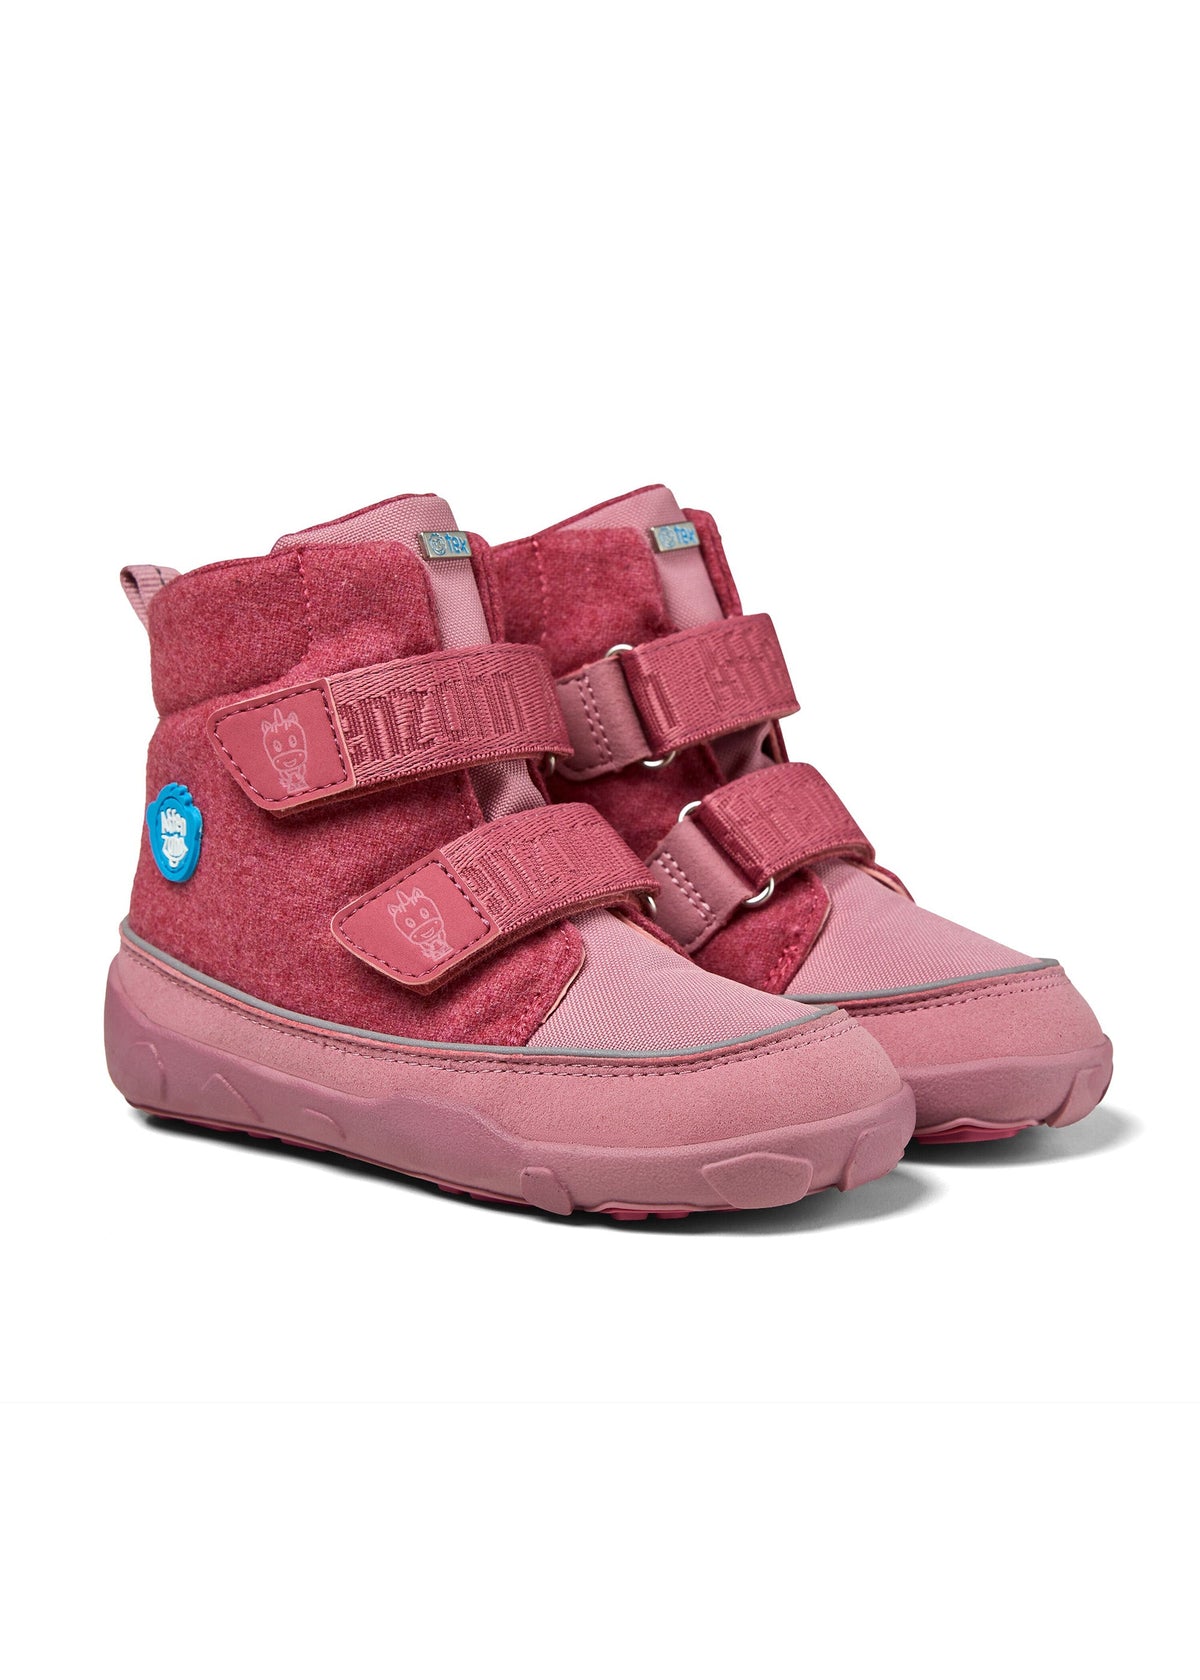 Children's barefoot shoes - Wool Comfy Unicorn, winter shoes with TEX membrane - pink, wool